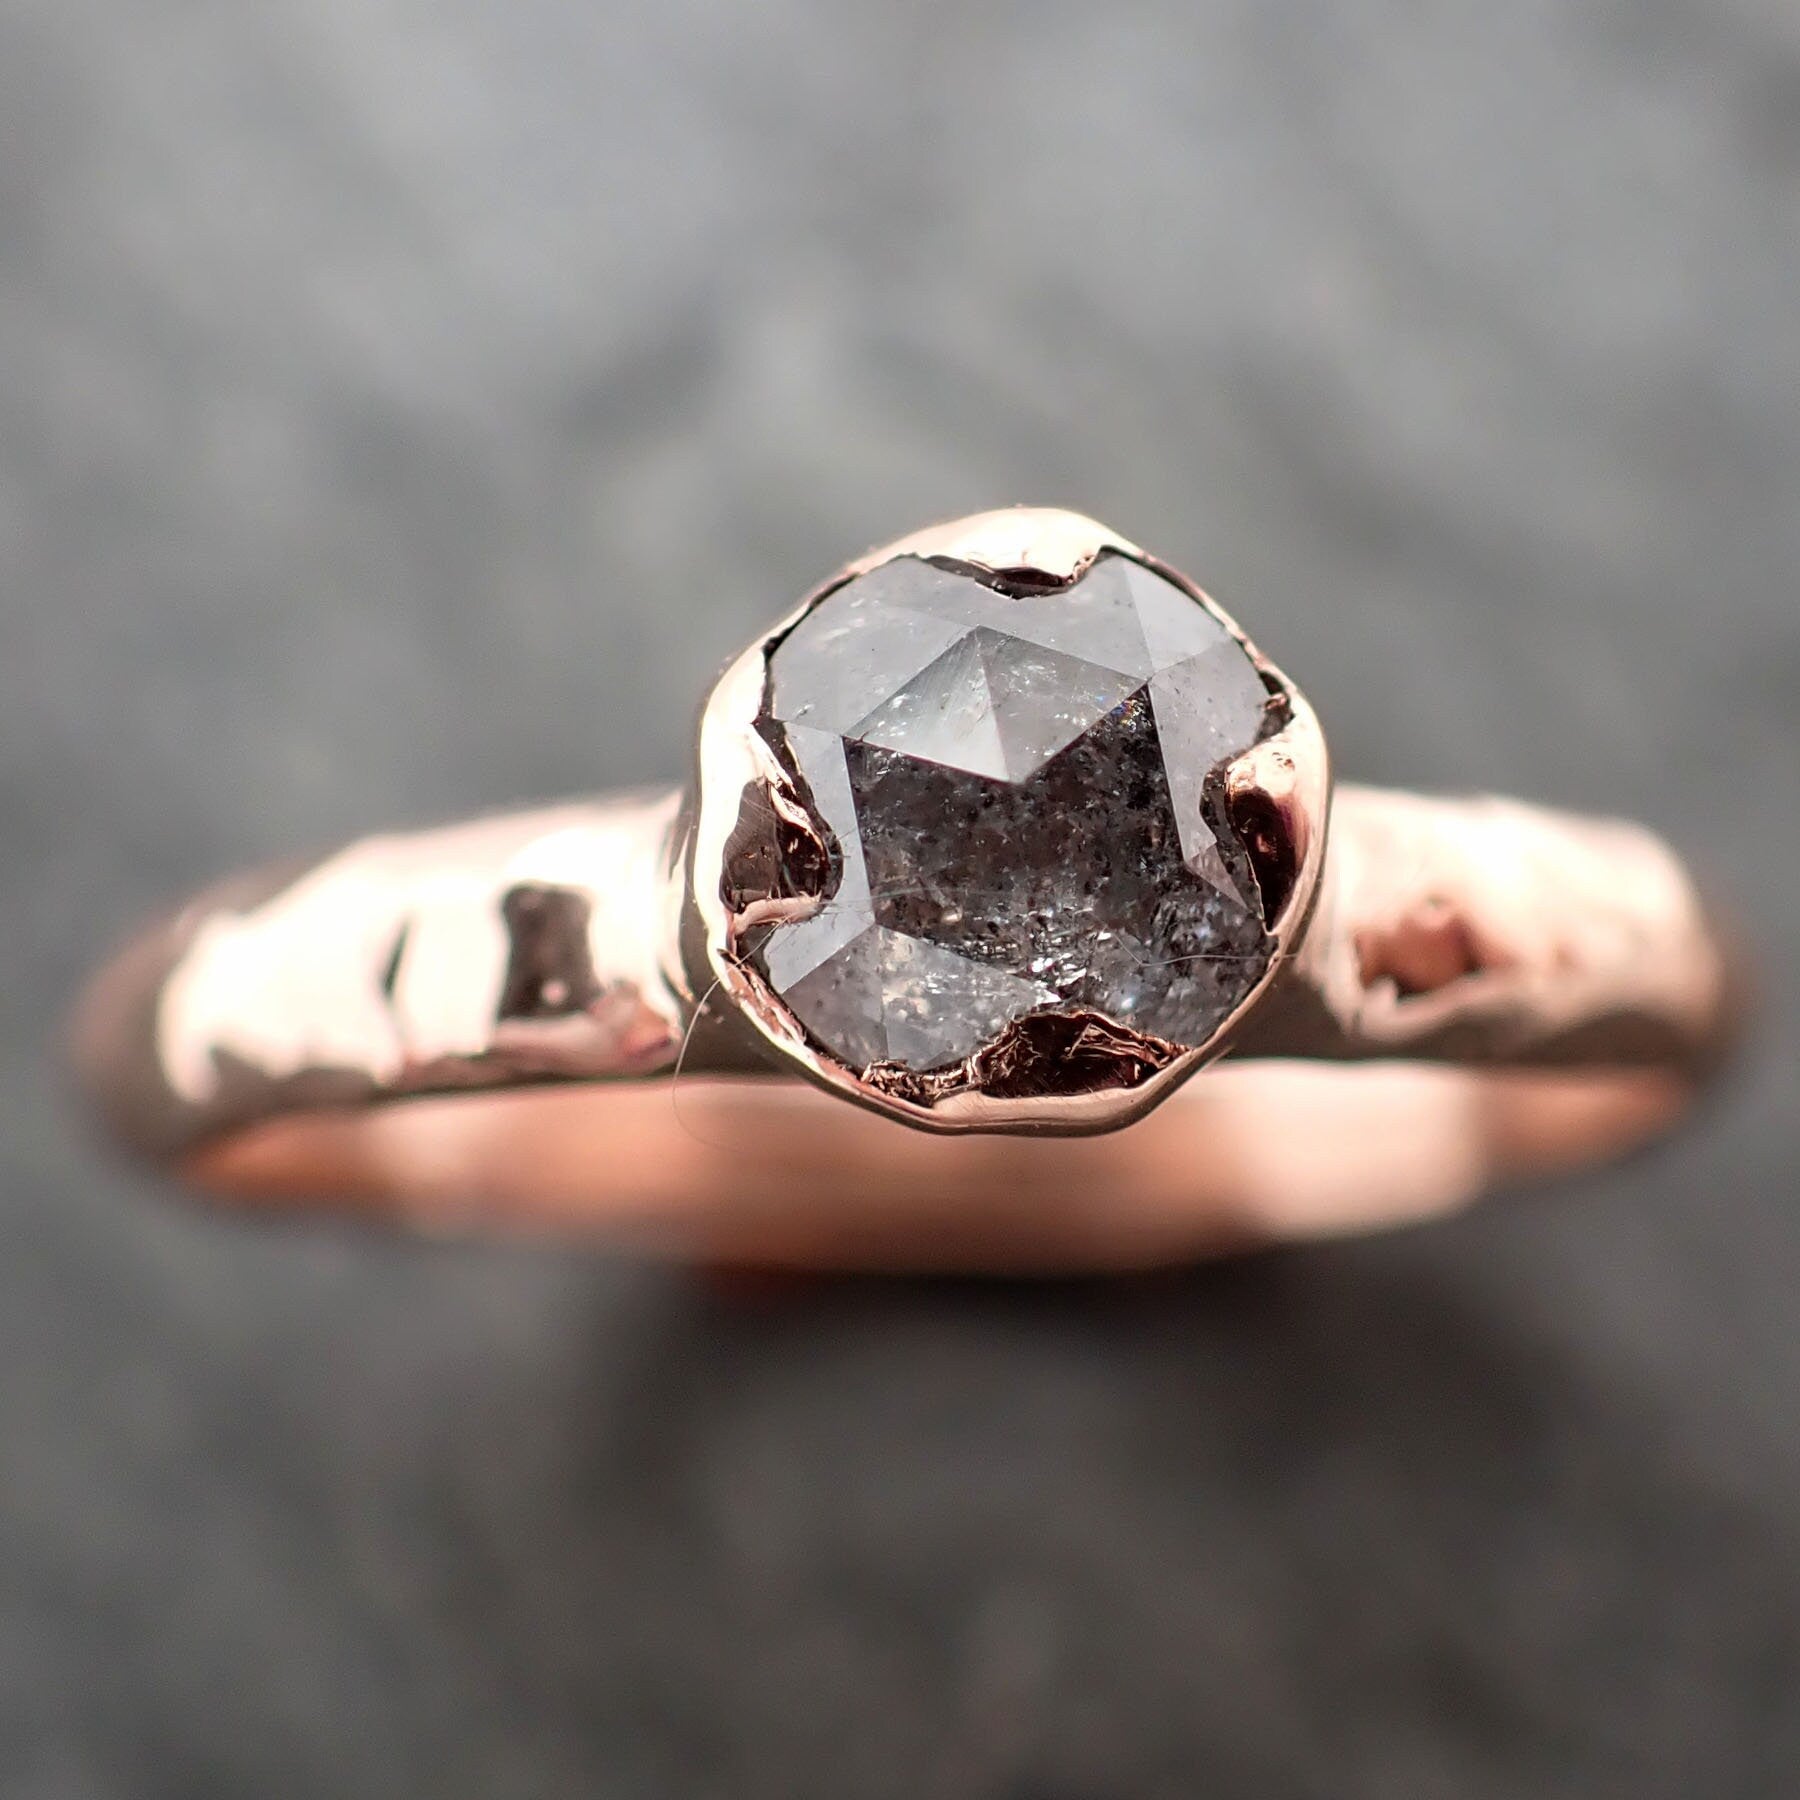 Faceted Fancy cut Salt and pepper Diamond Solitaire Engagement 14k Rose Gold Wedding Ring byAngeline 2911